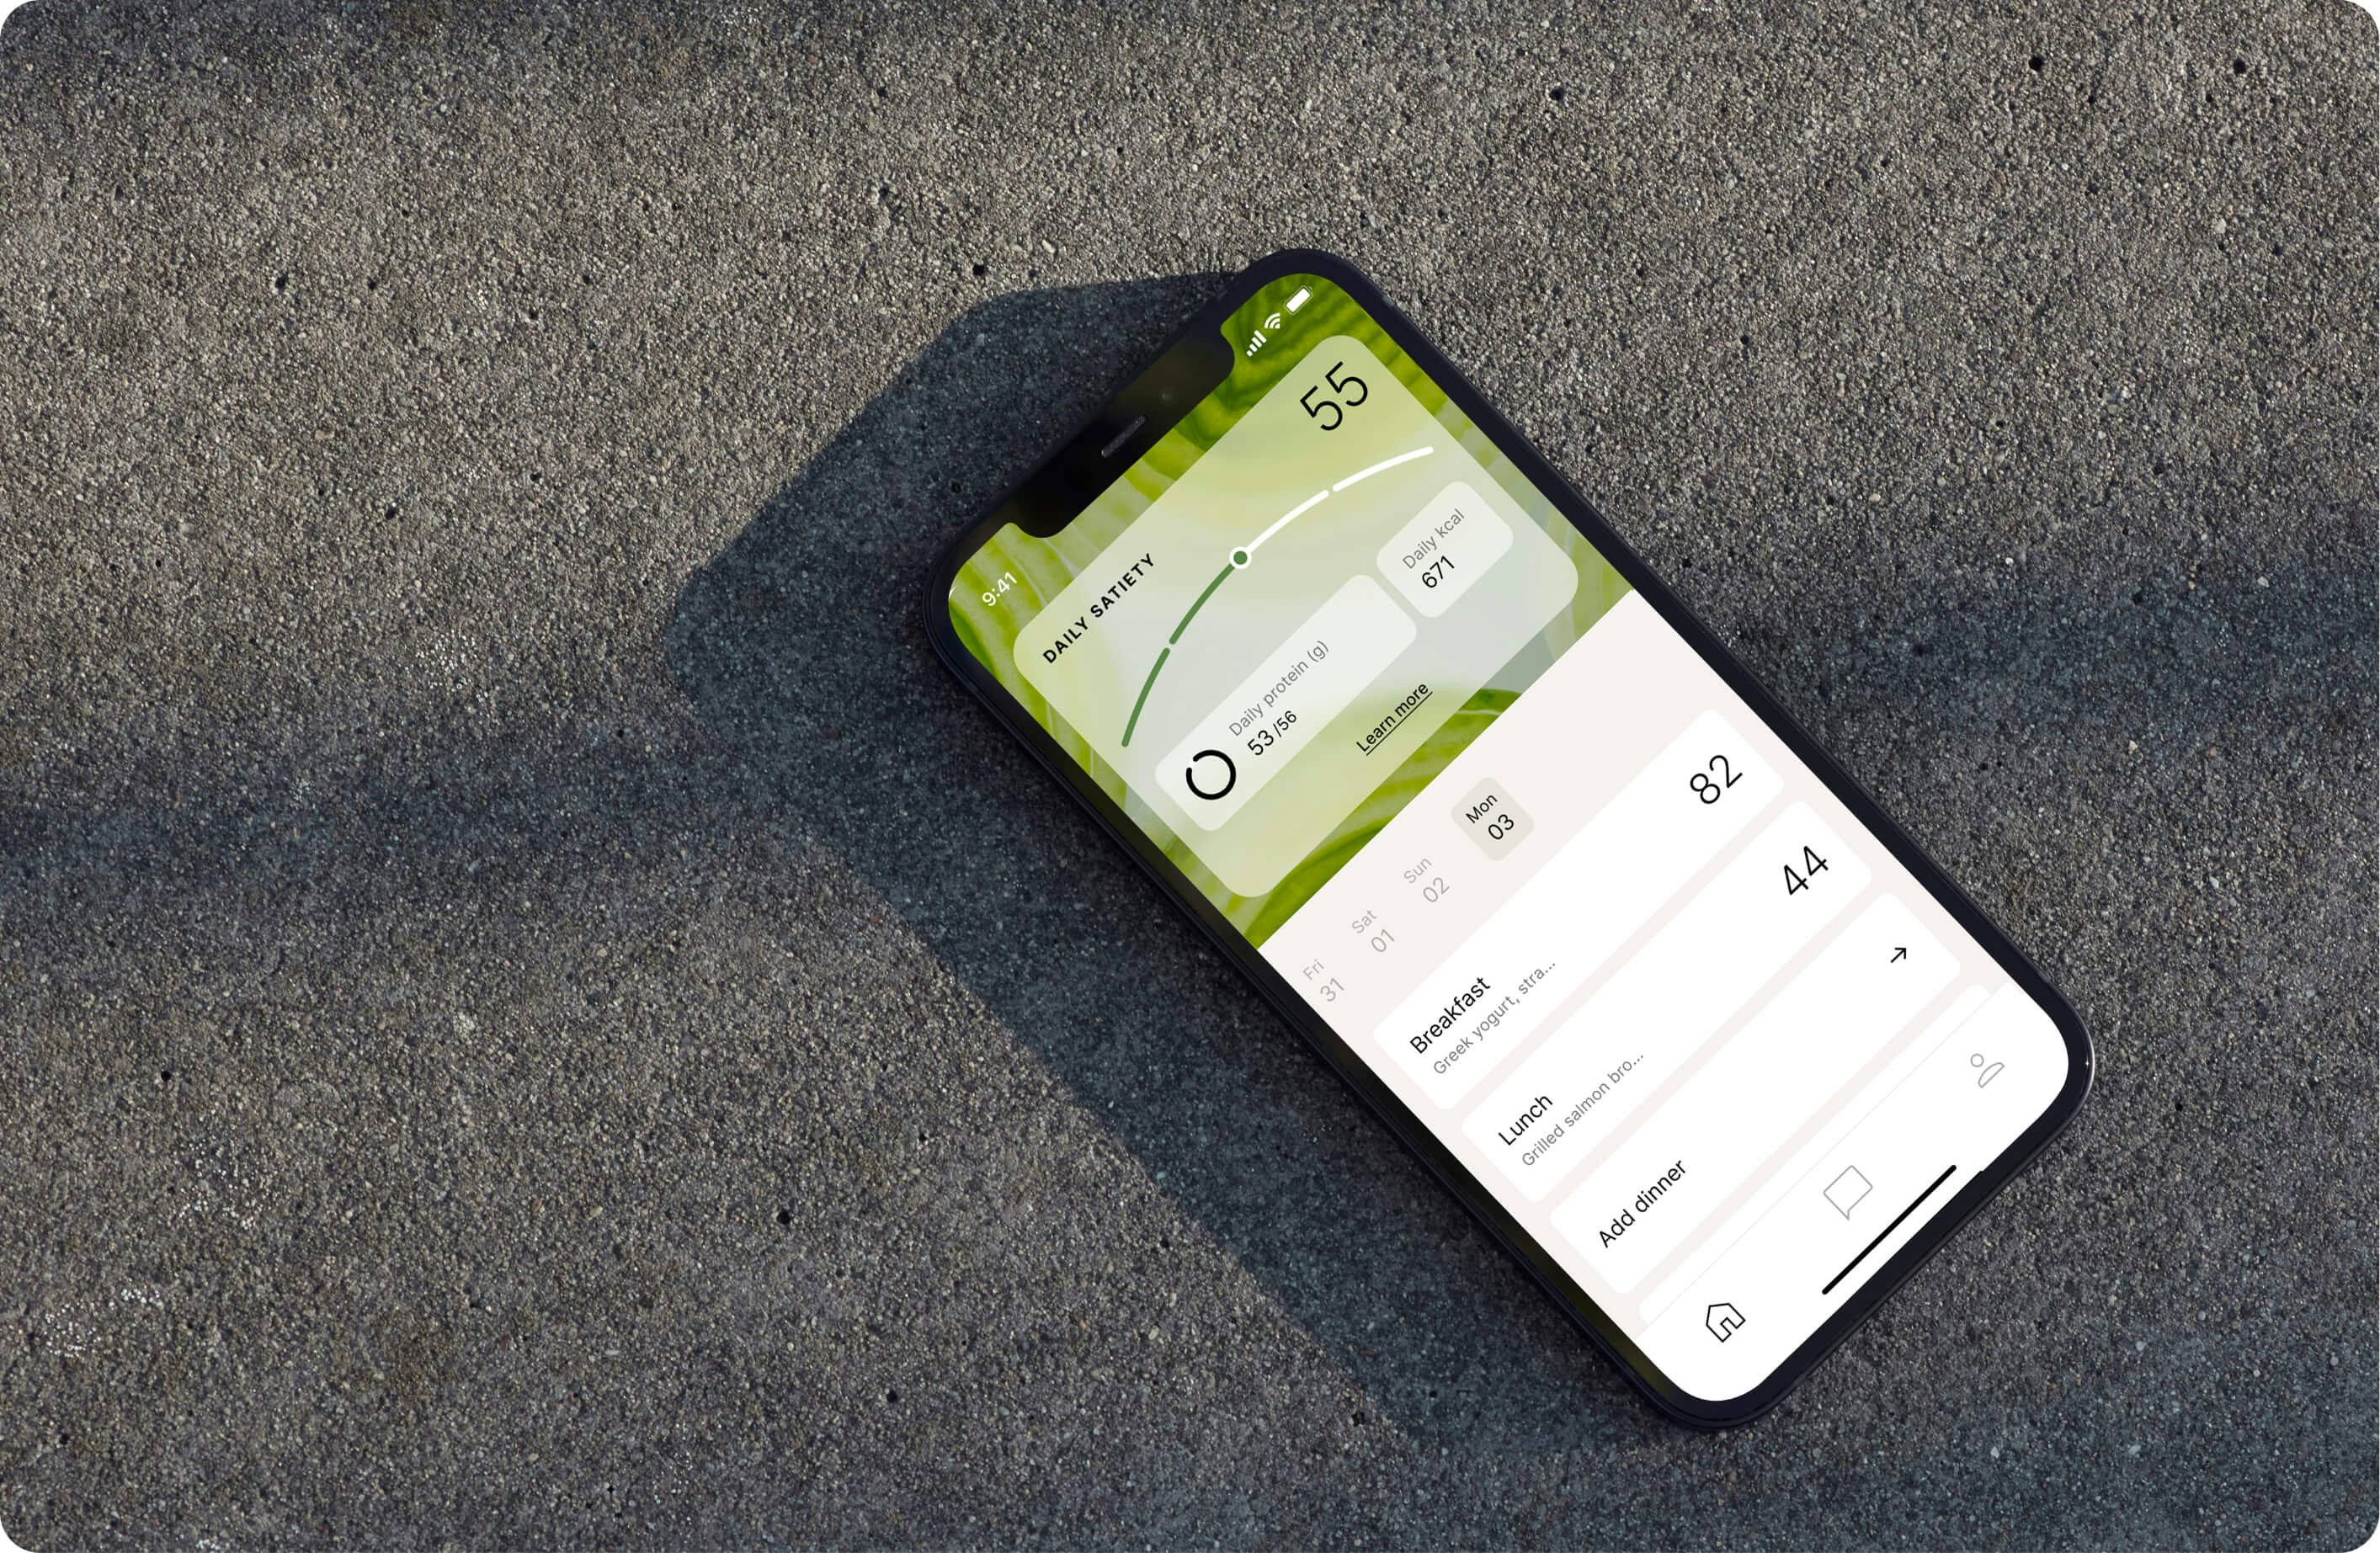 Phone on the ground with Hava app open